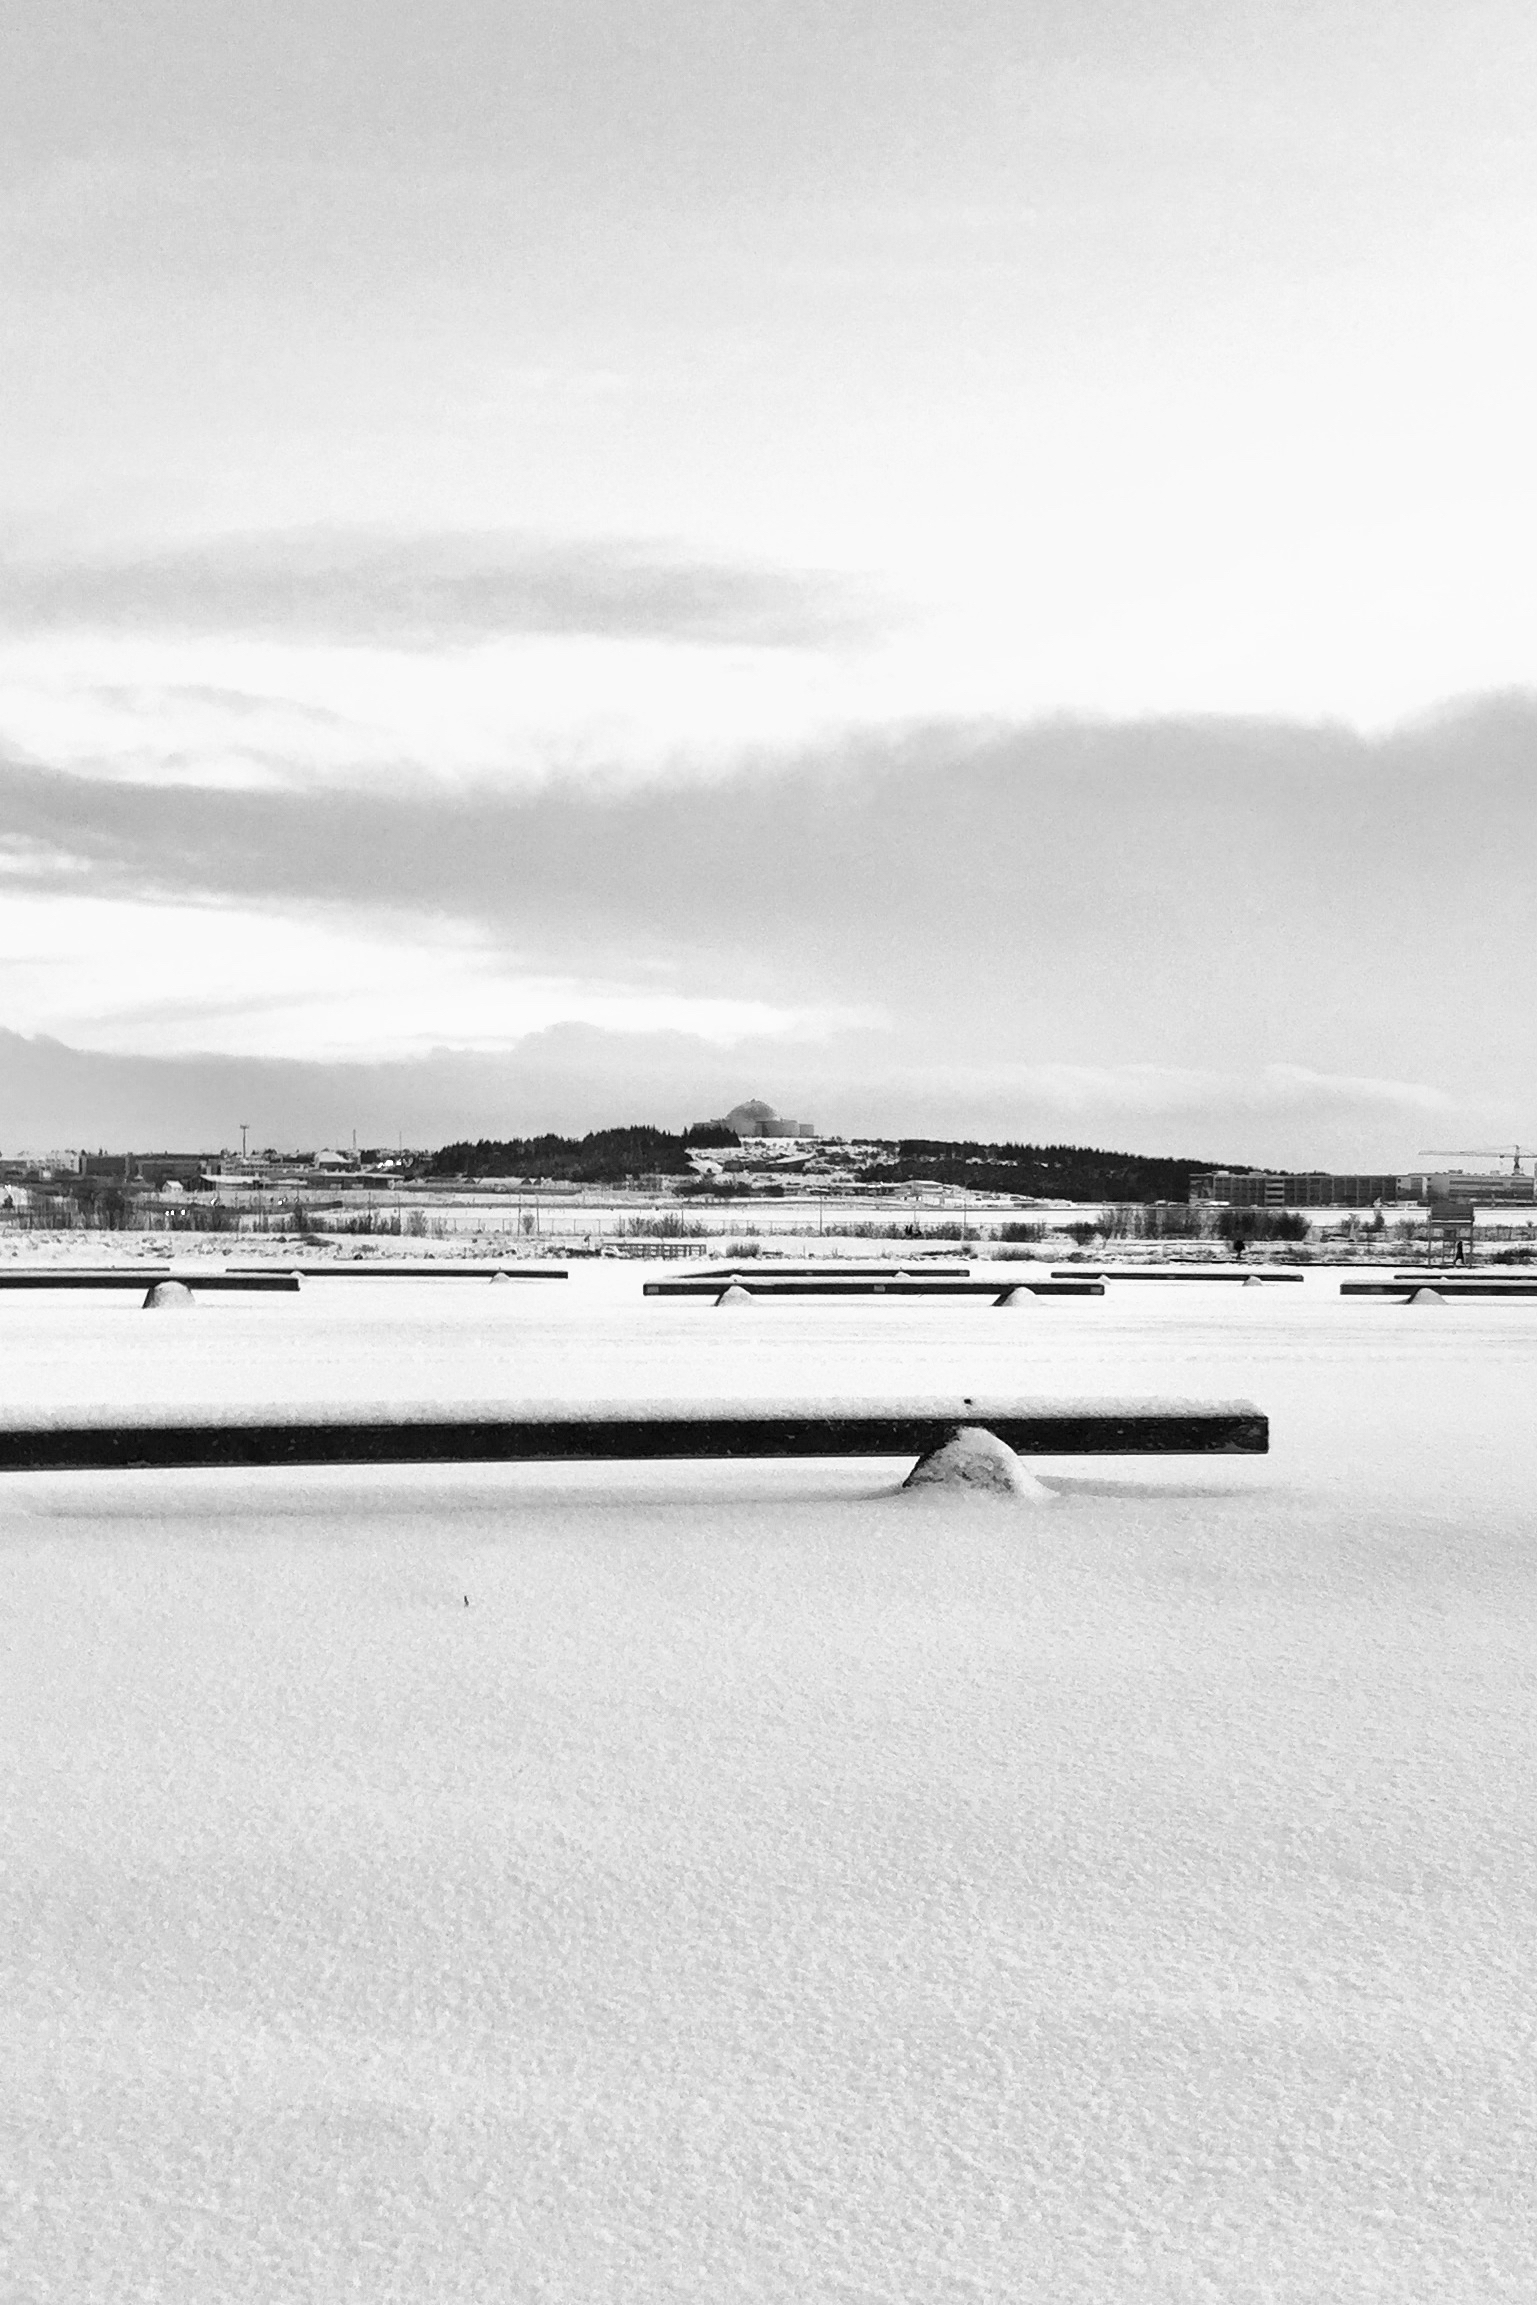 A photograph of the view surrounding the University of Iceland with the Pearl on Öskjuhlíðin hill in the distance.